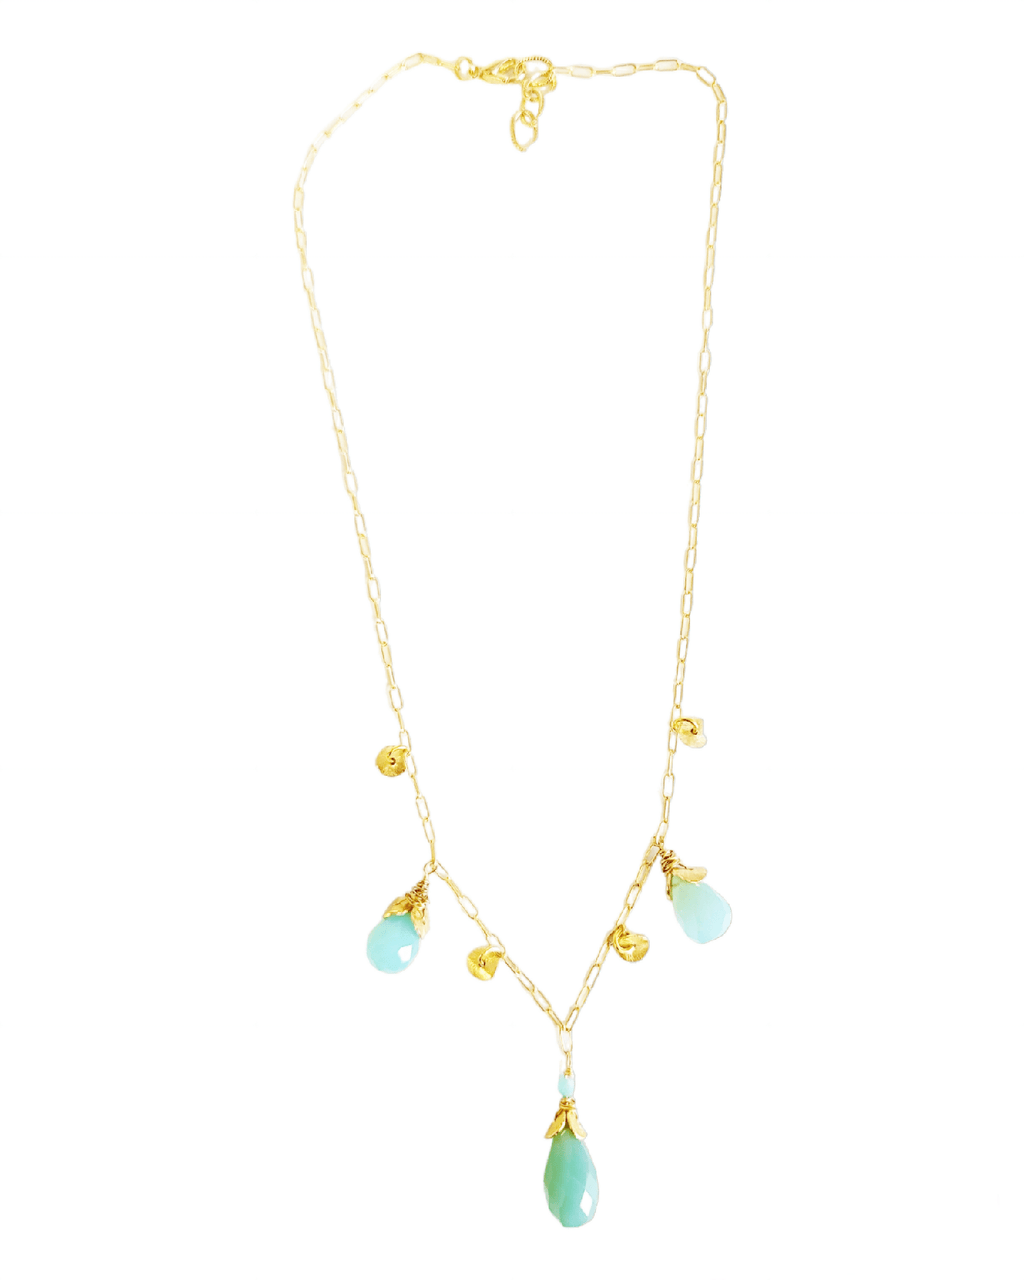 MINU Jewels Necklace Ka 16-18" Subtle Statement Necklace in Blue Chalcedony with Gold Accents | MINU